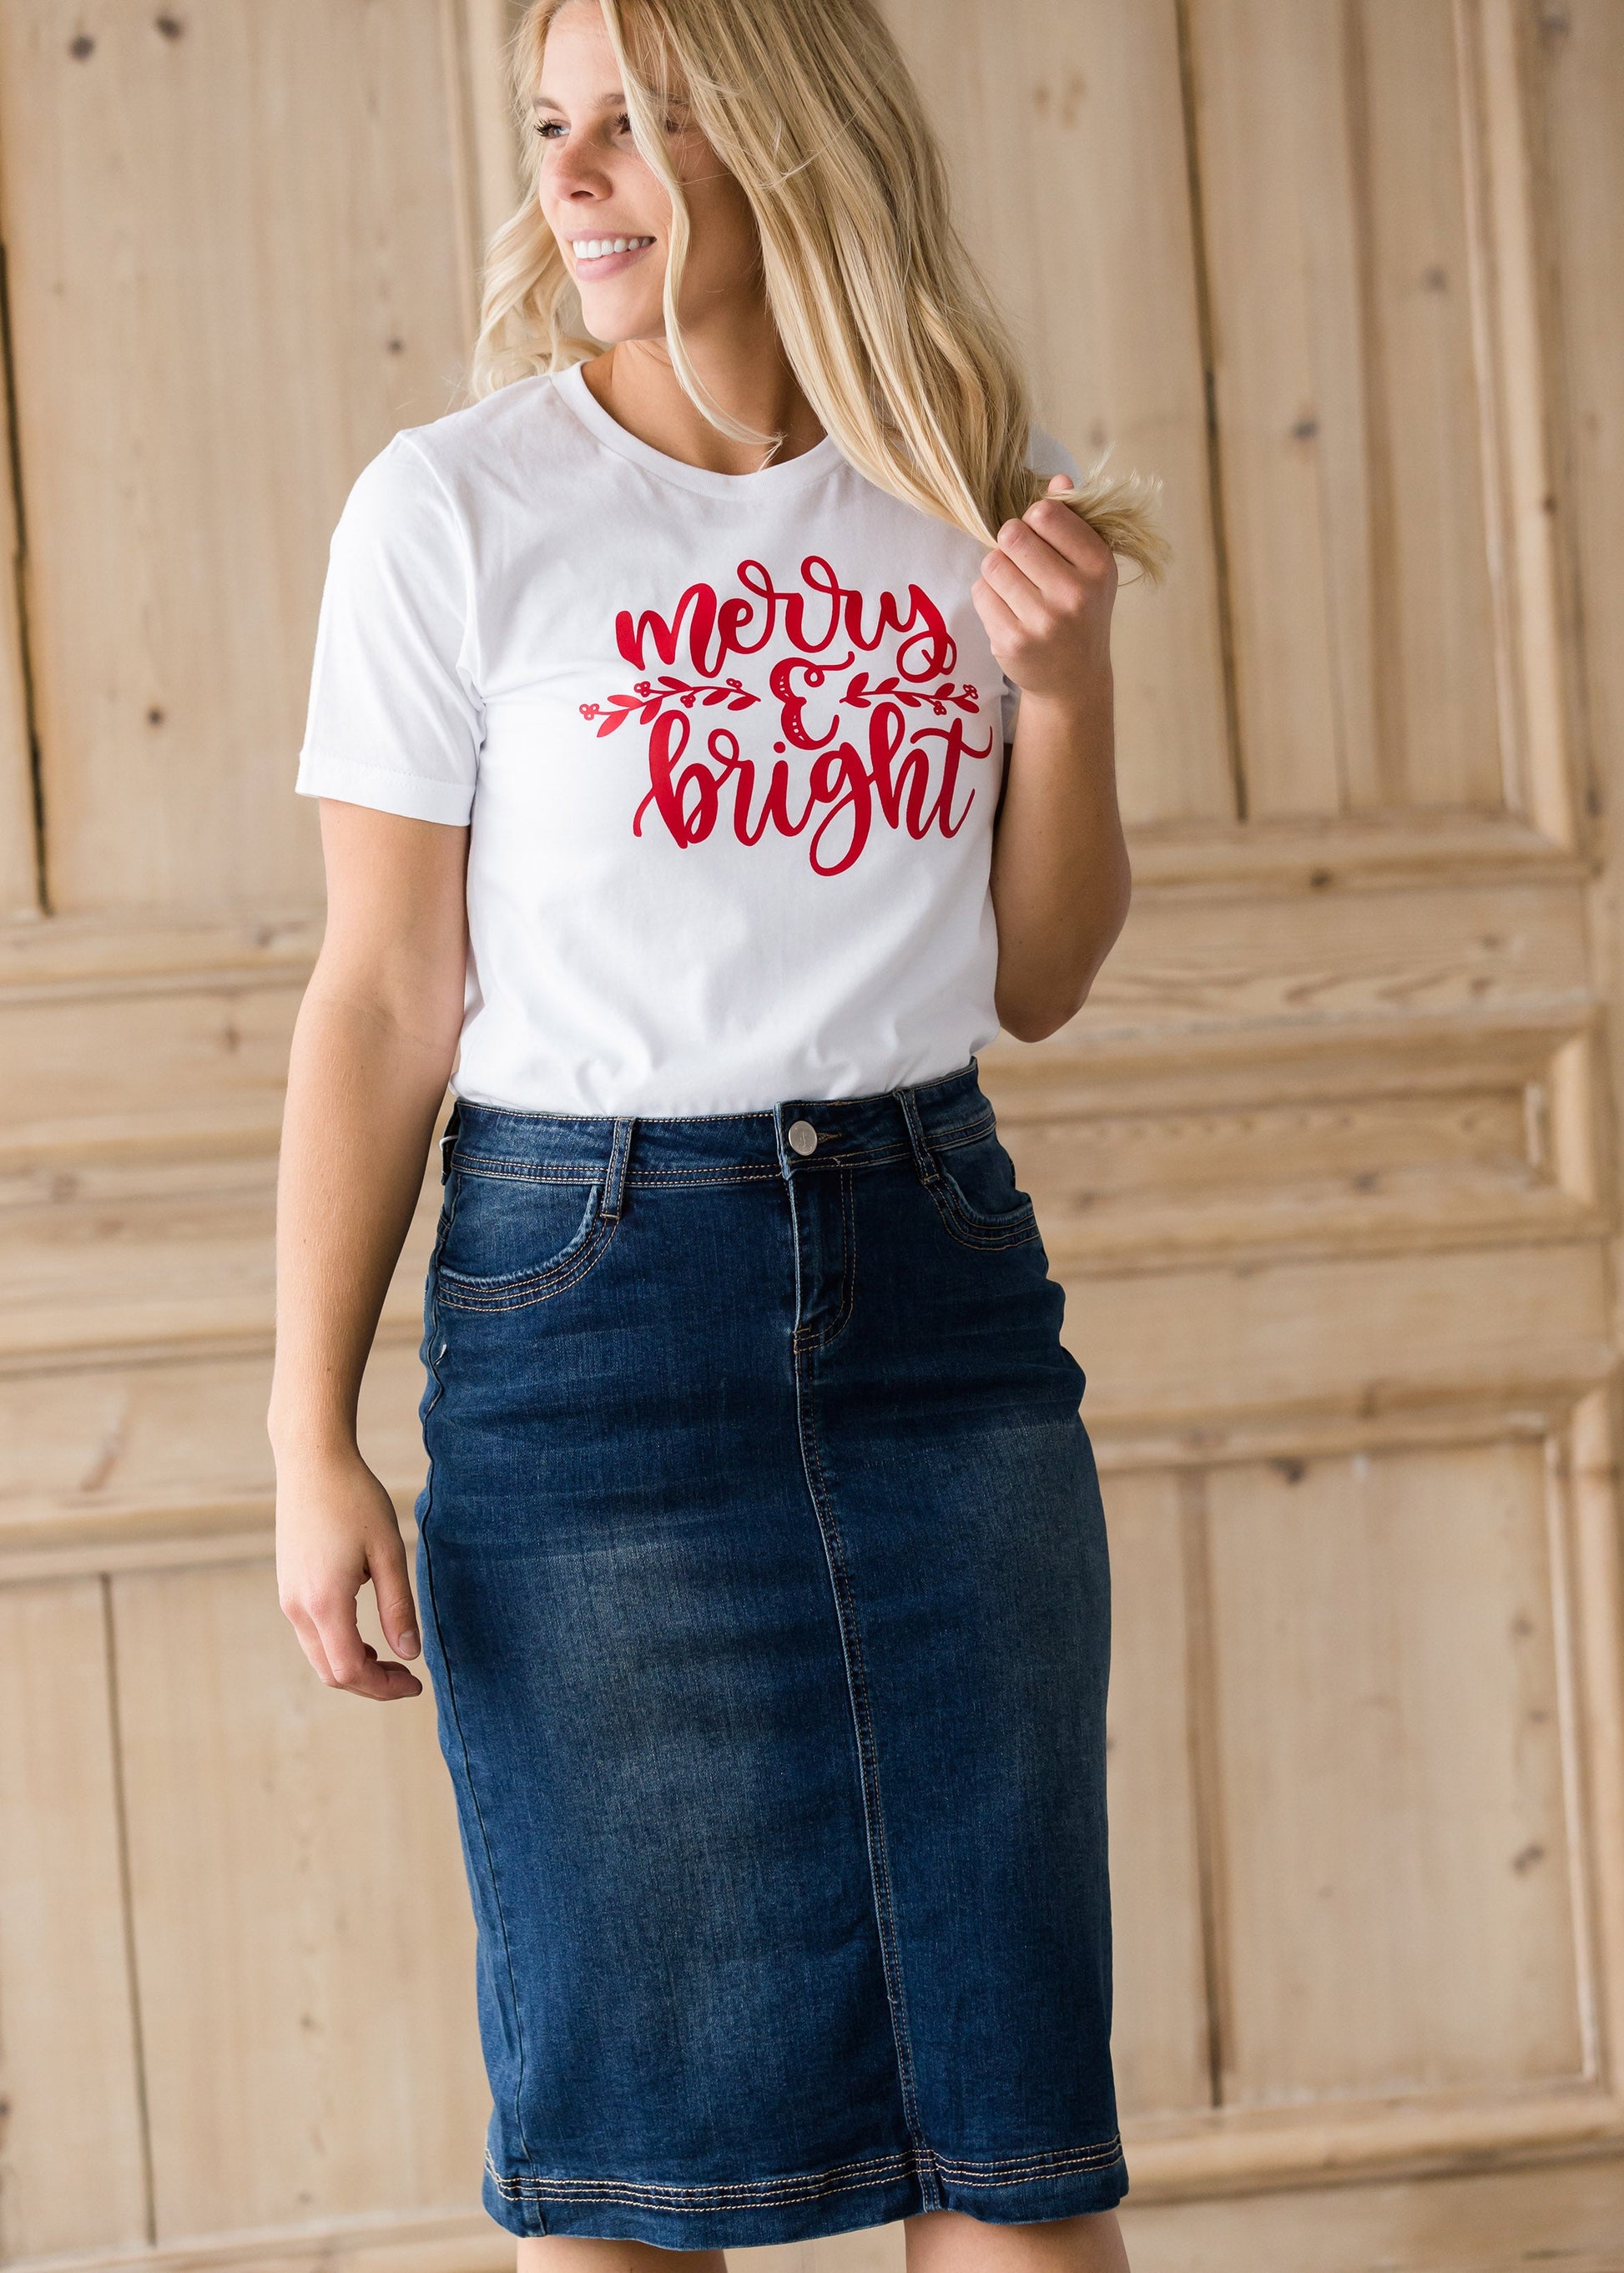 Merry & Bright Christmas Graphic Tee Tops